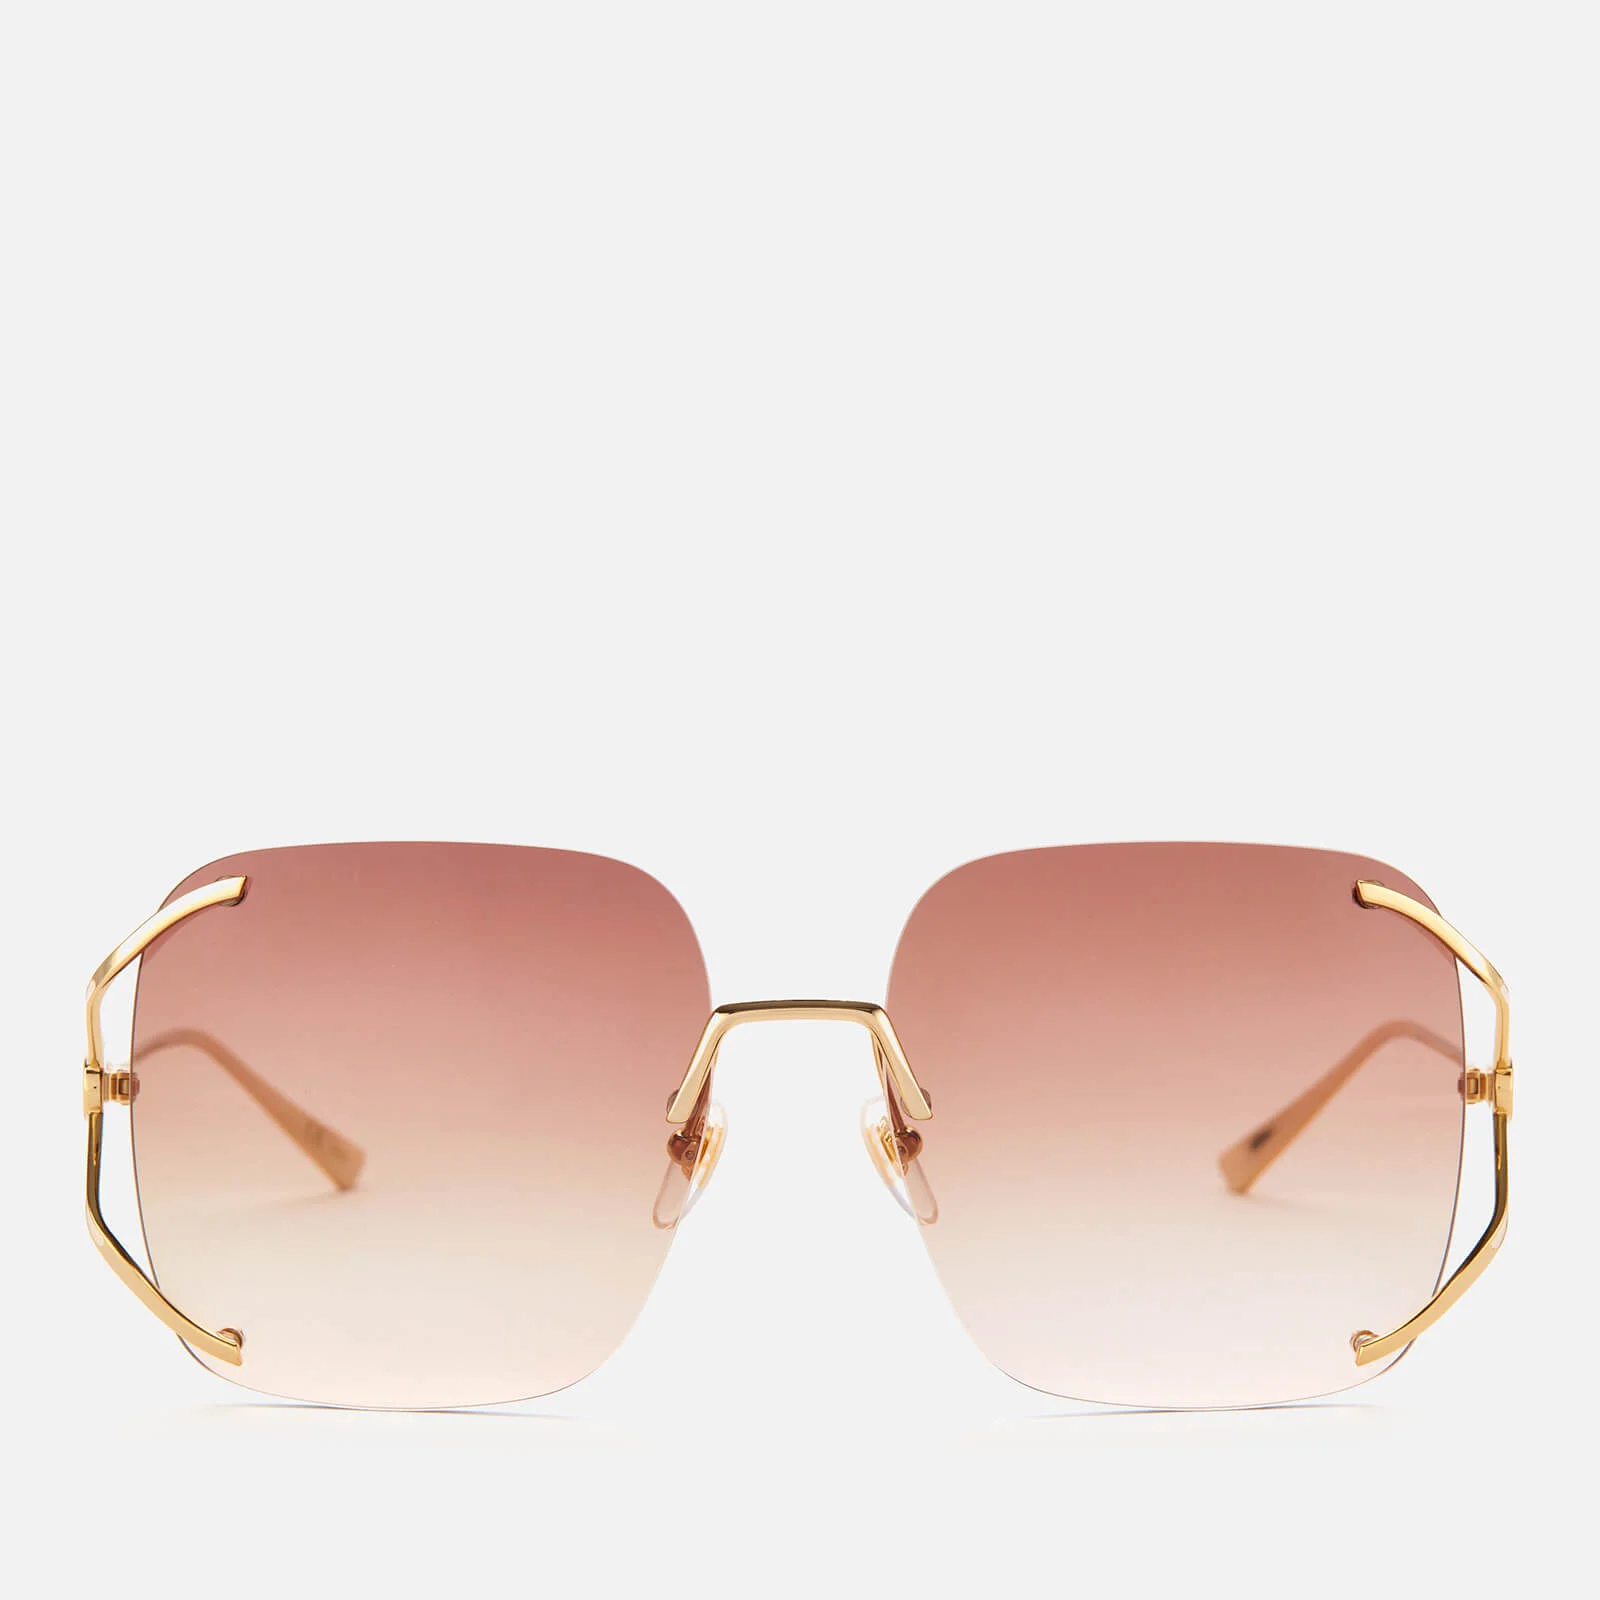 Gucci Women's Oversized Square Frame Sunglasses - Gold/Brown Image 1